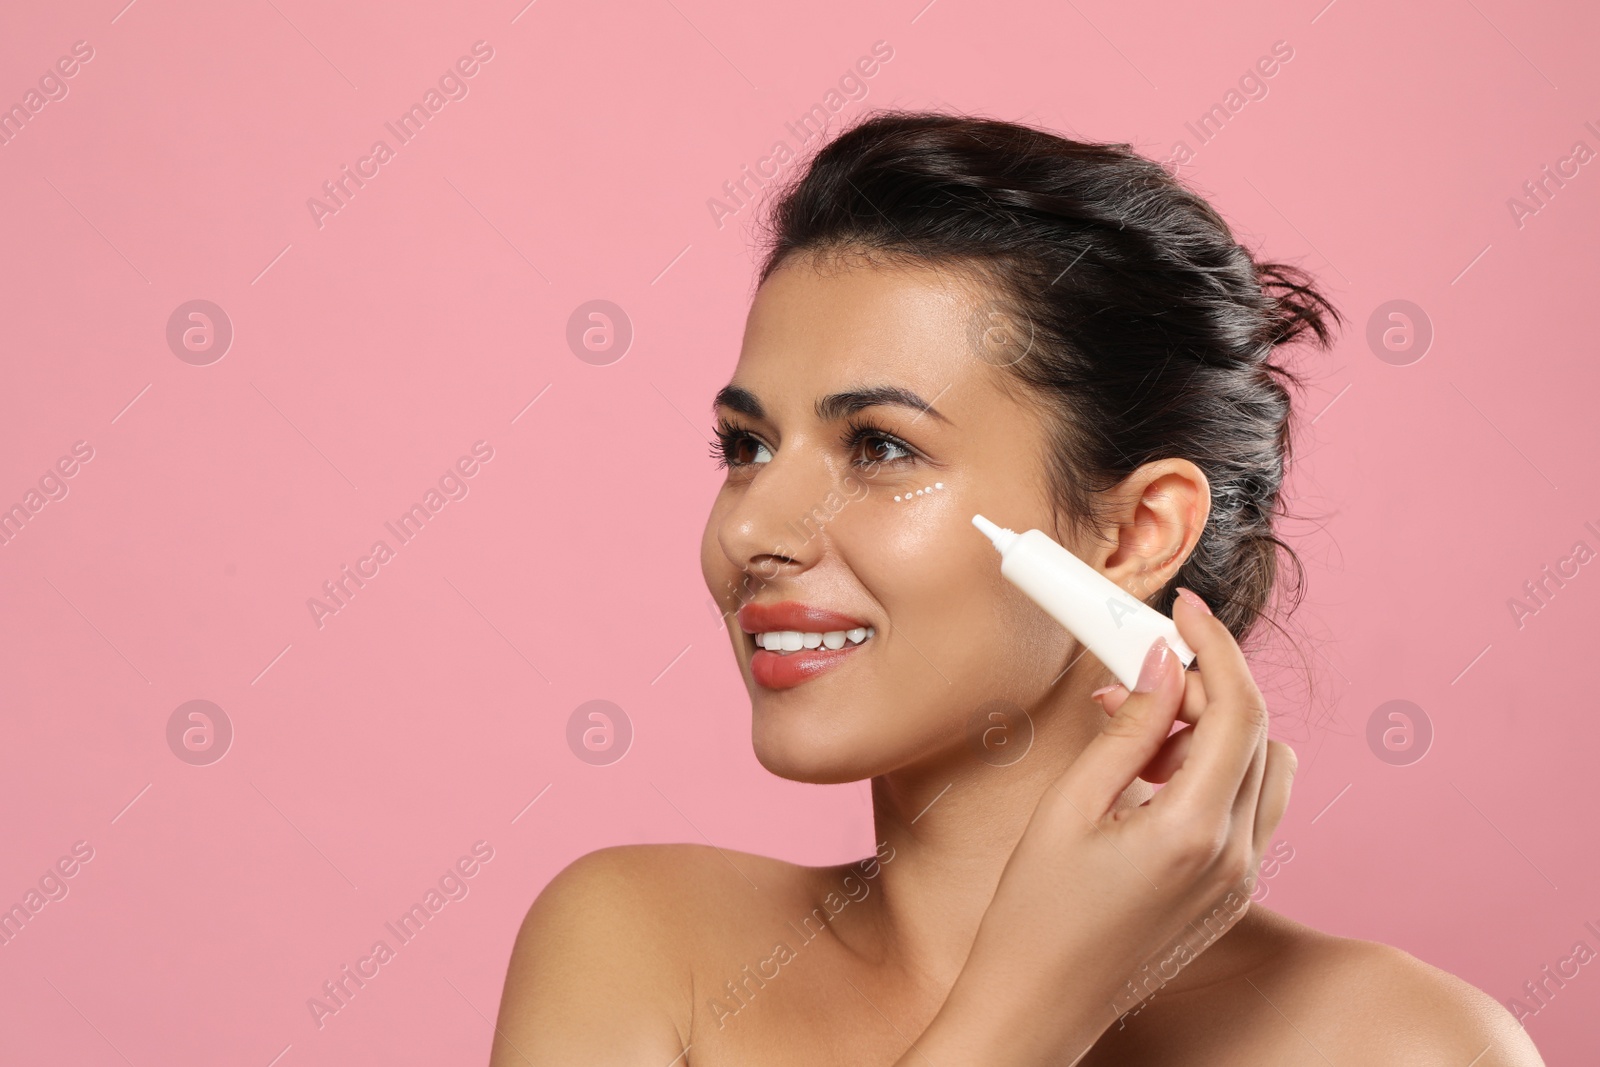 Photo of Woman applying cream under eyes on pink background. Skin care, space for text